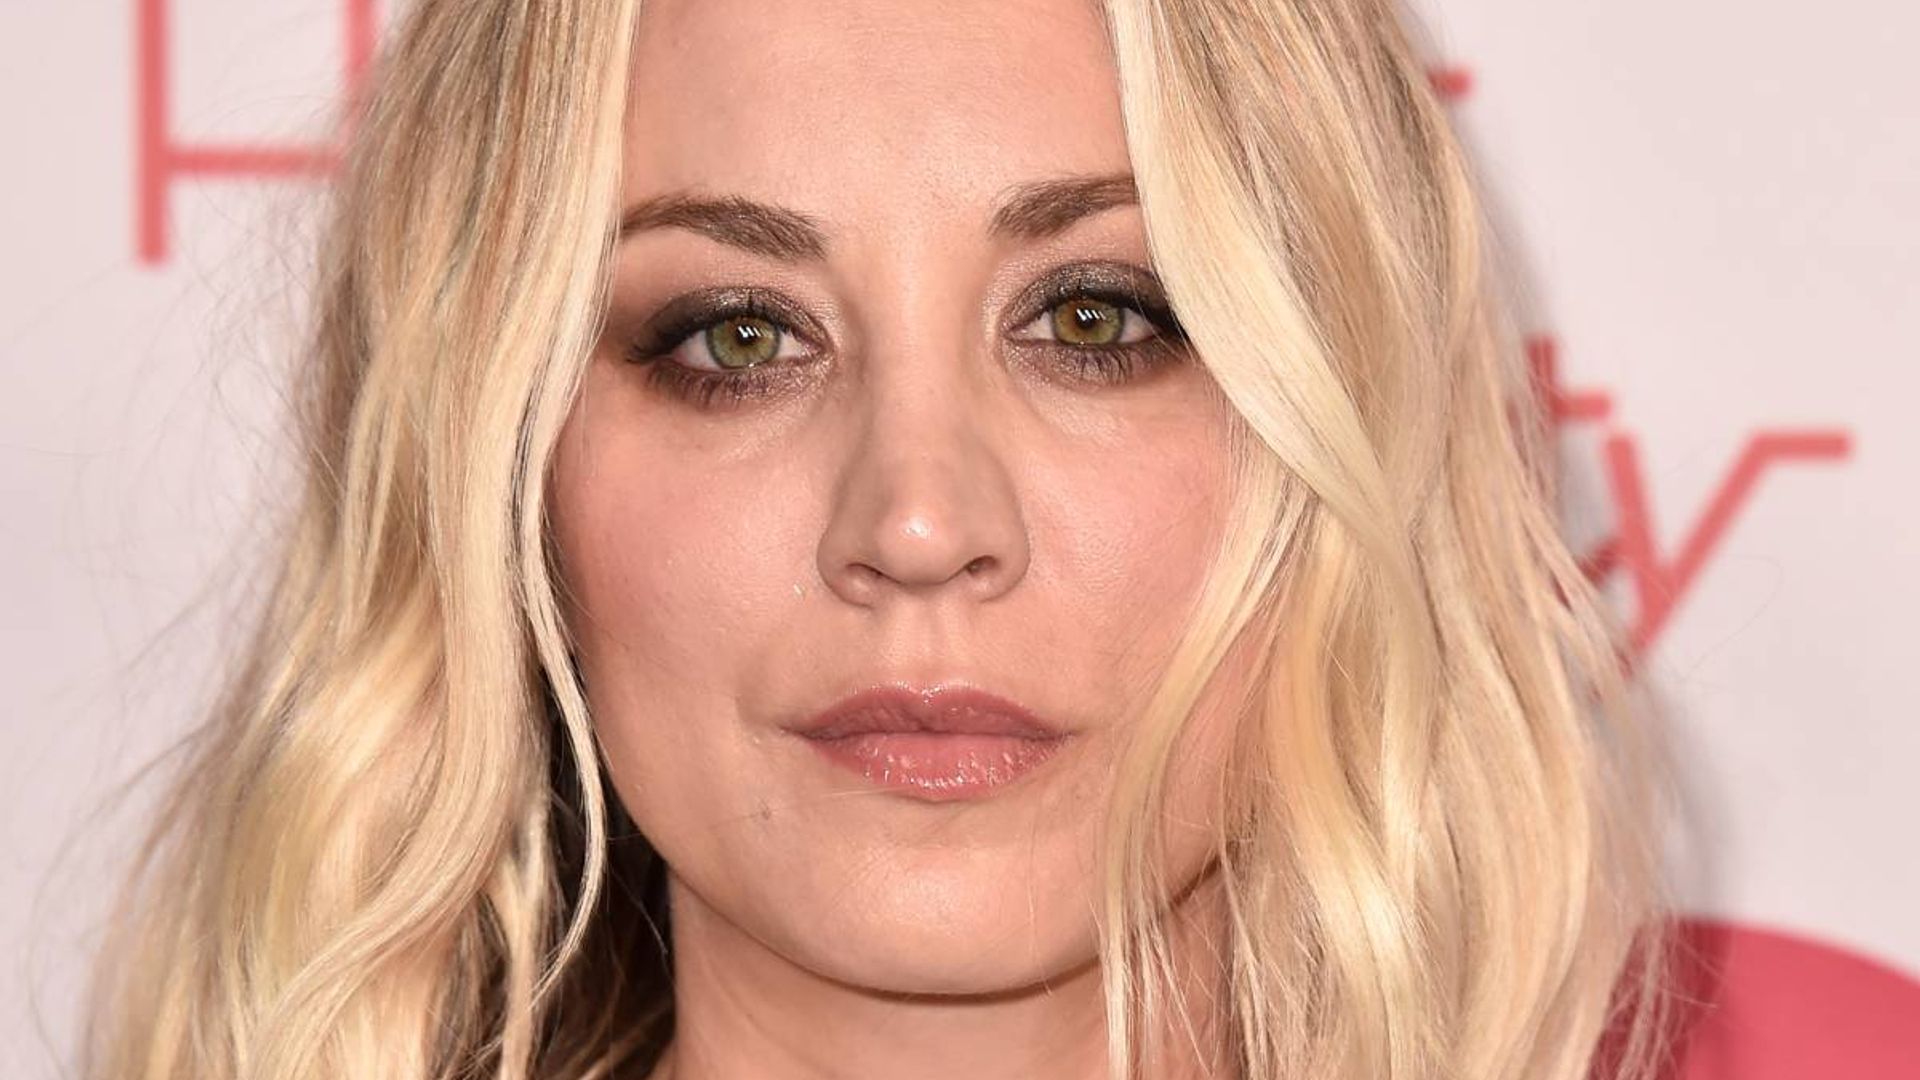 Kaley Cuoco reflects on devastating death in emotional post: 'Can't believe you've been gone a year'